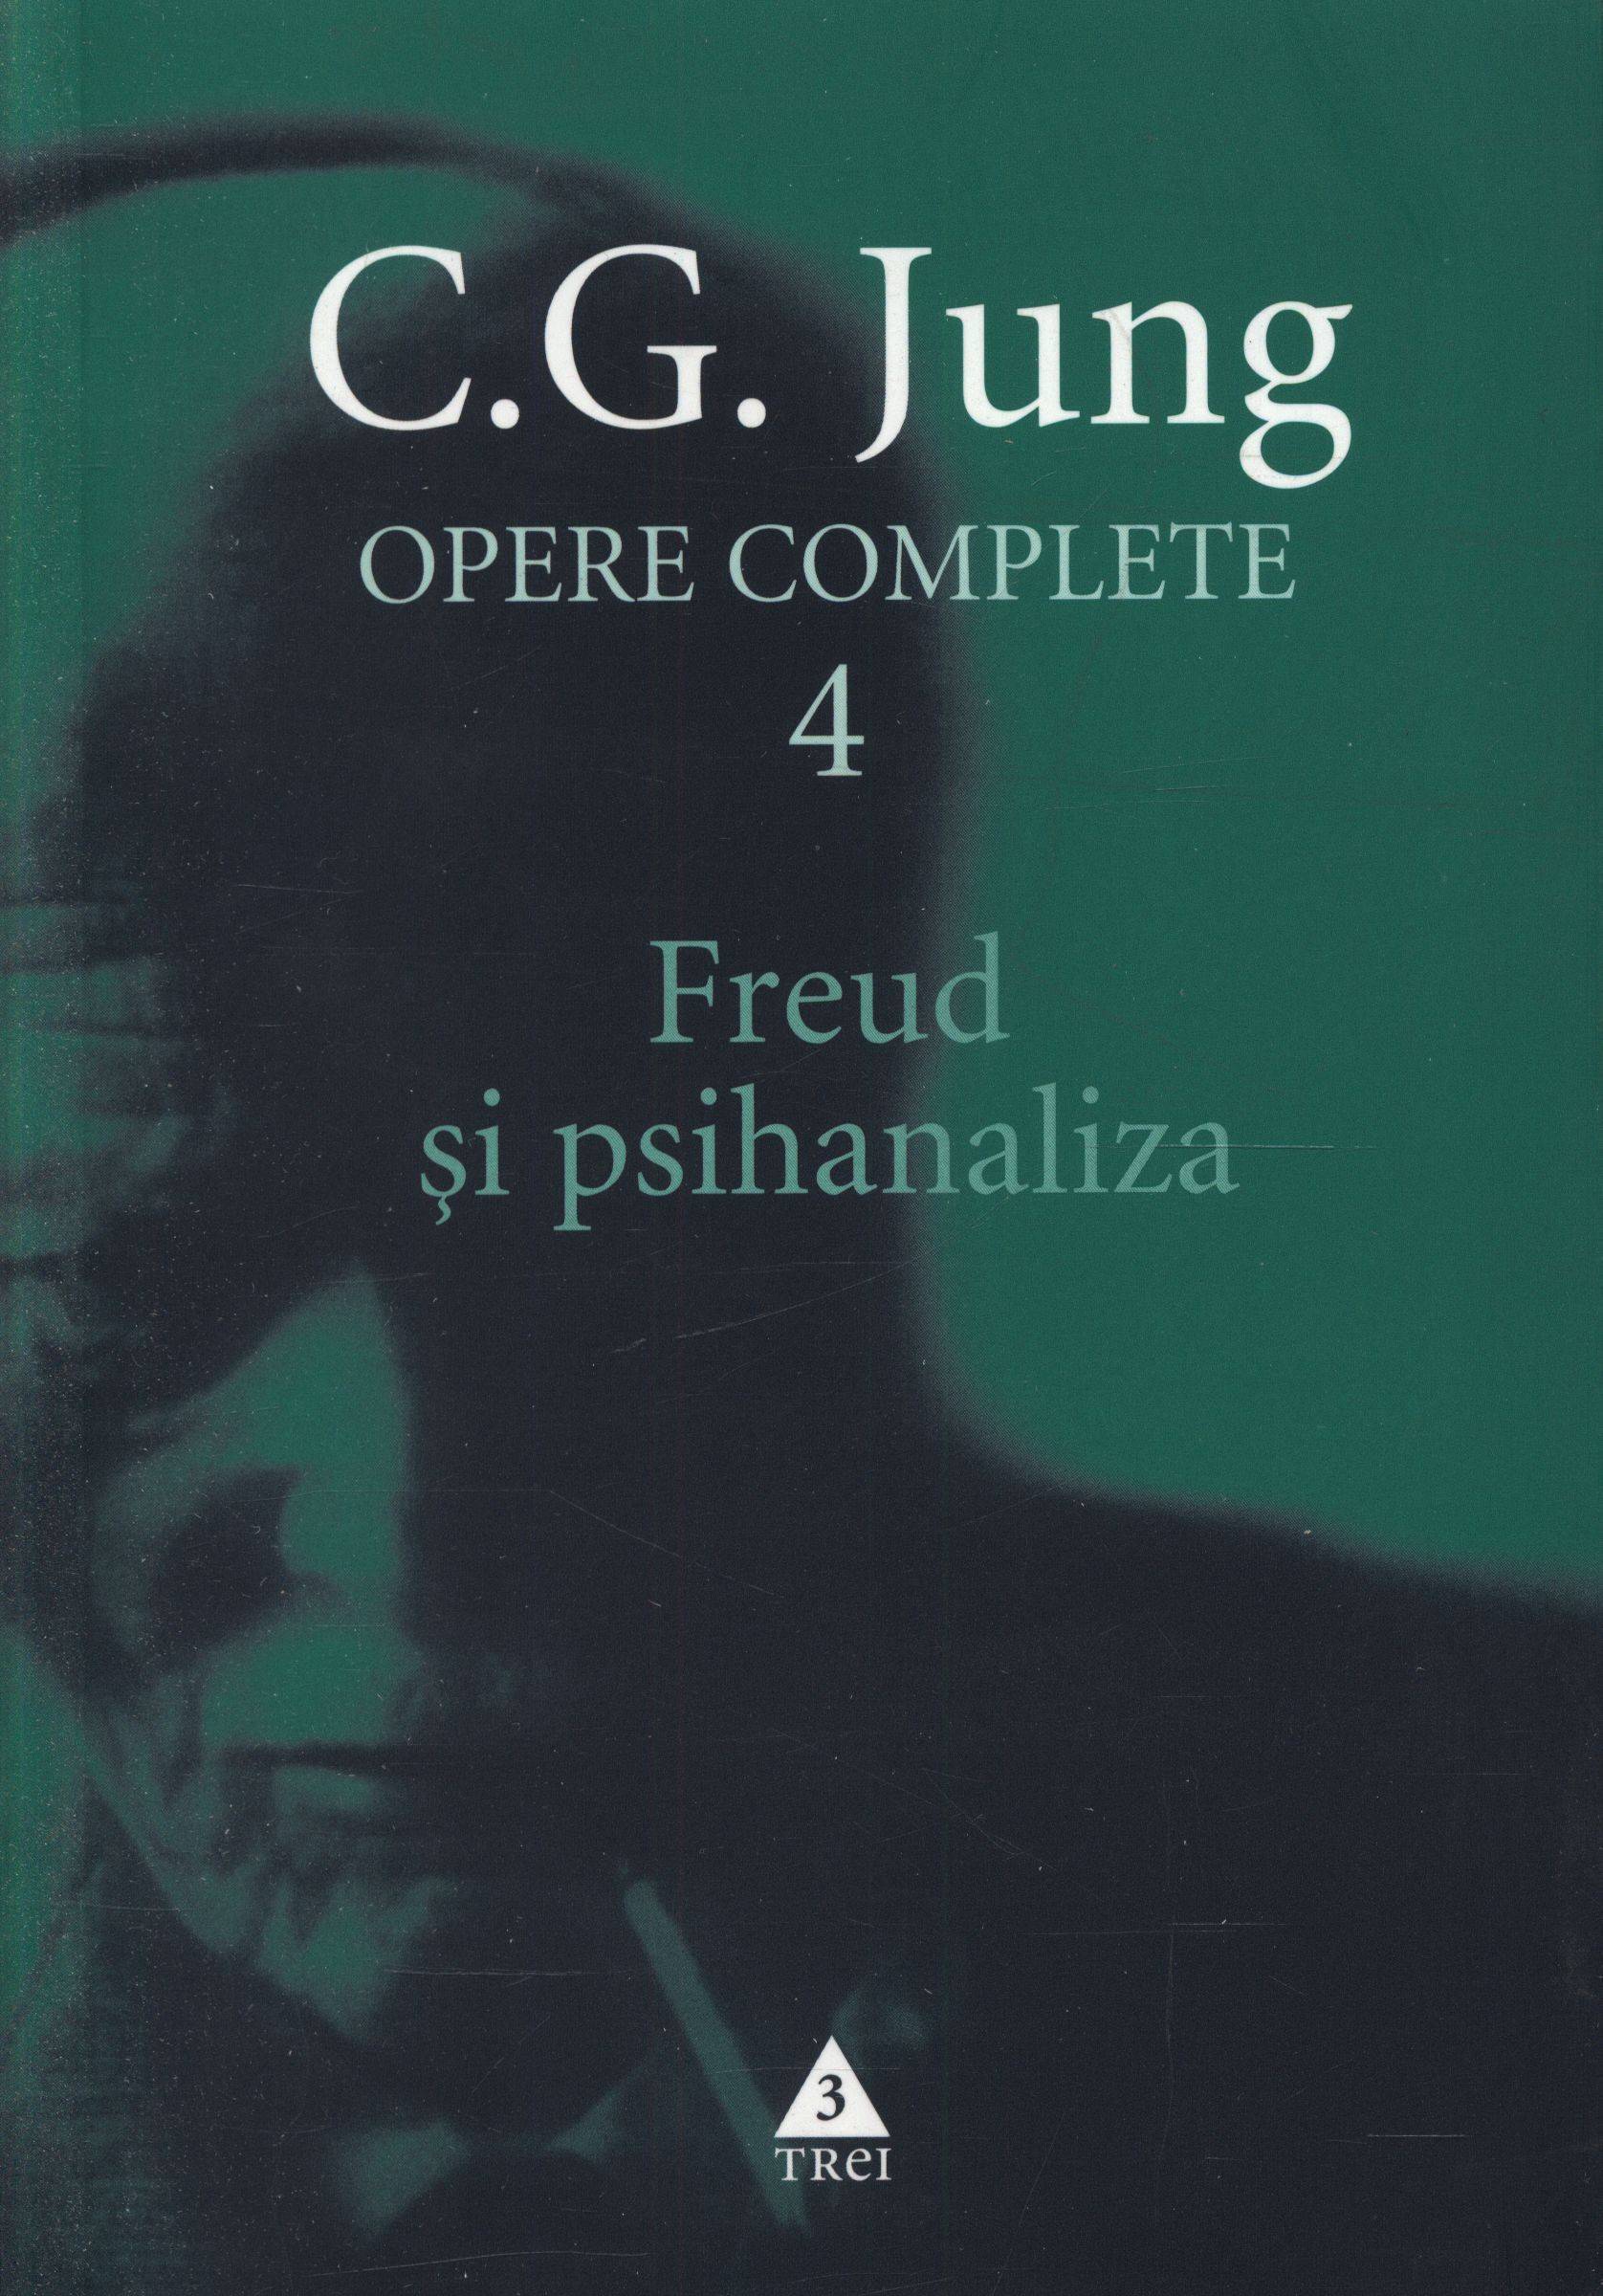 Opere complete 4 - Freud si psihanaliza - C.G. Jung